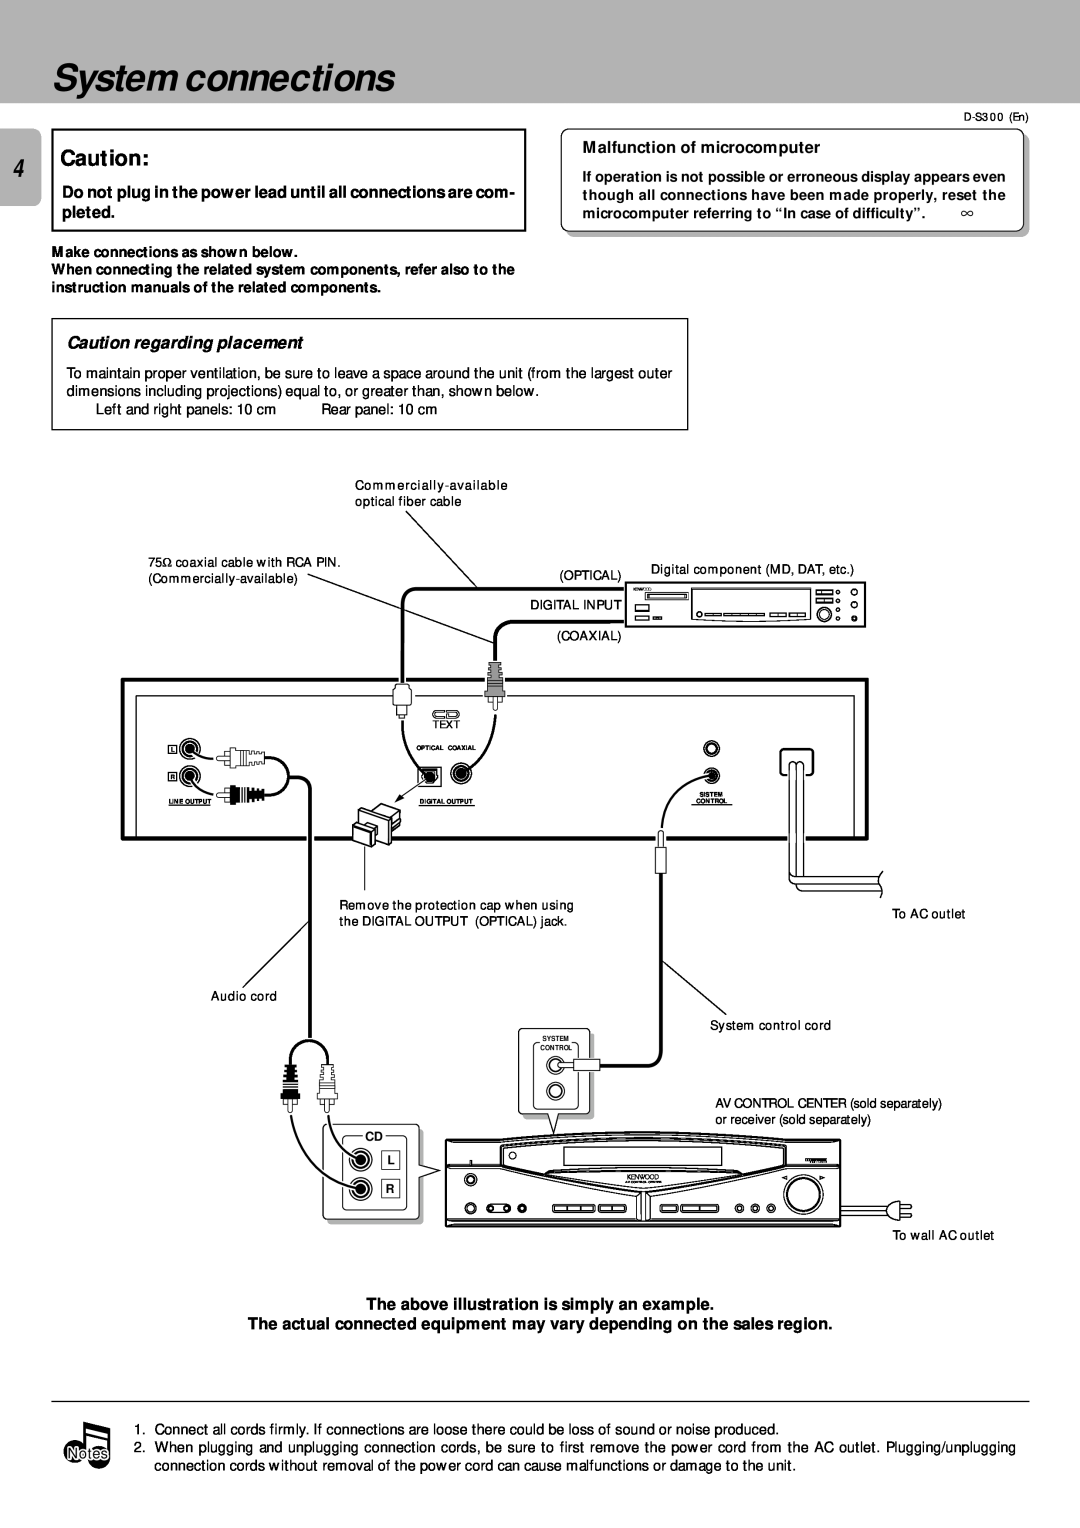 Kenwood D-S300 instruction manual System connections, Caution regarding placement, Make connections as shown below 